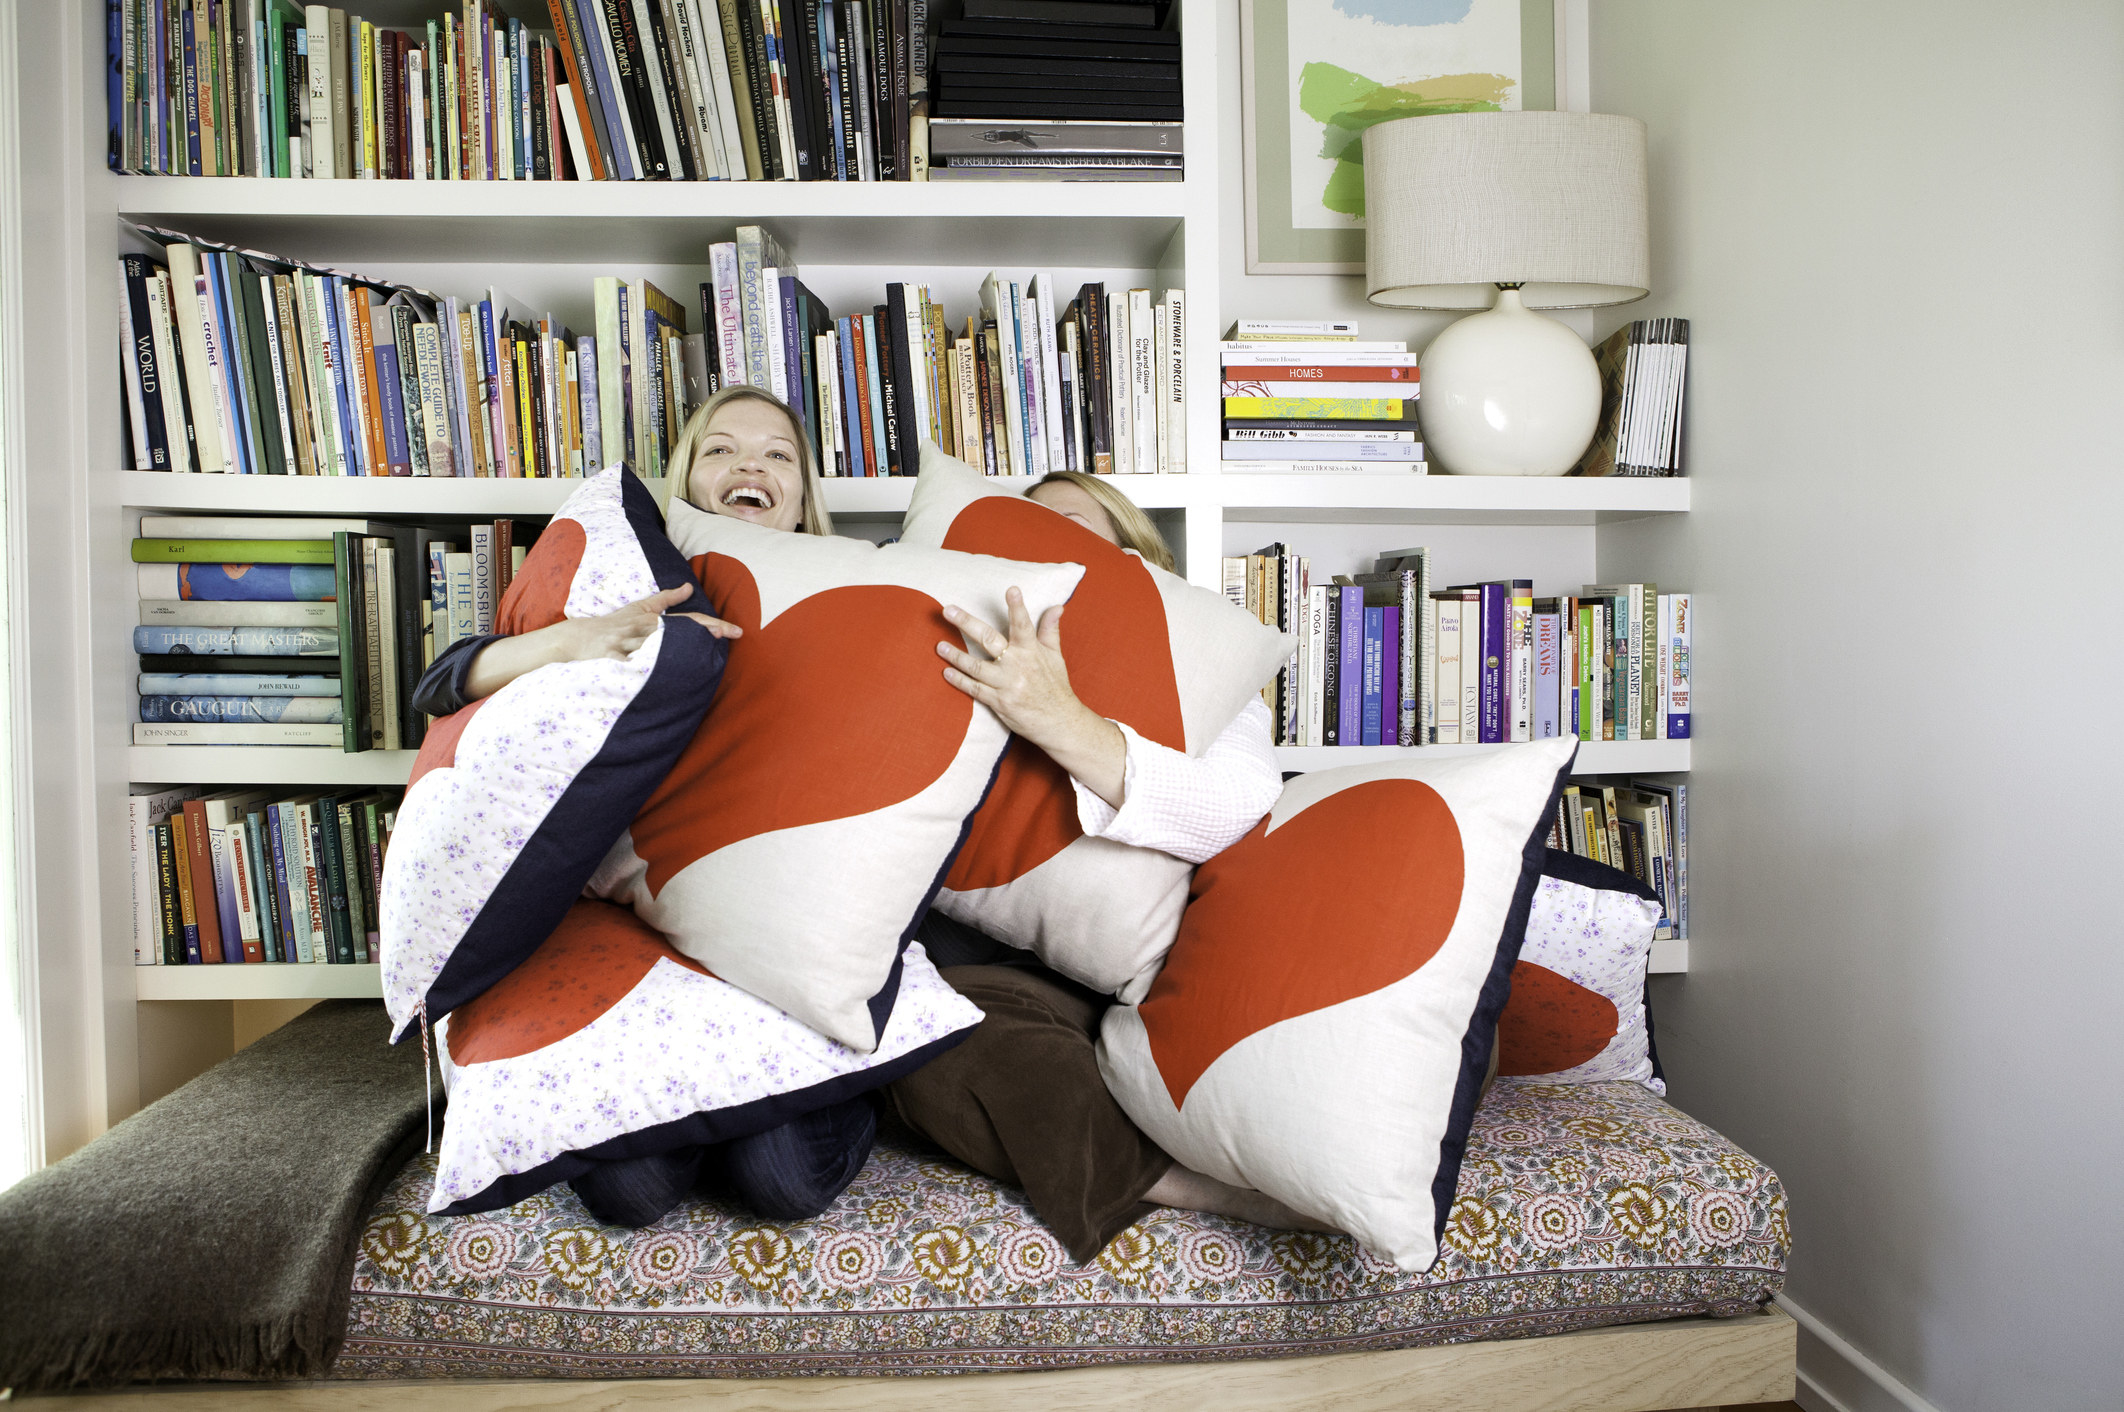 women on couch with many pillows